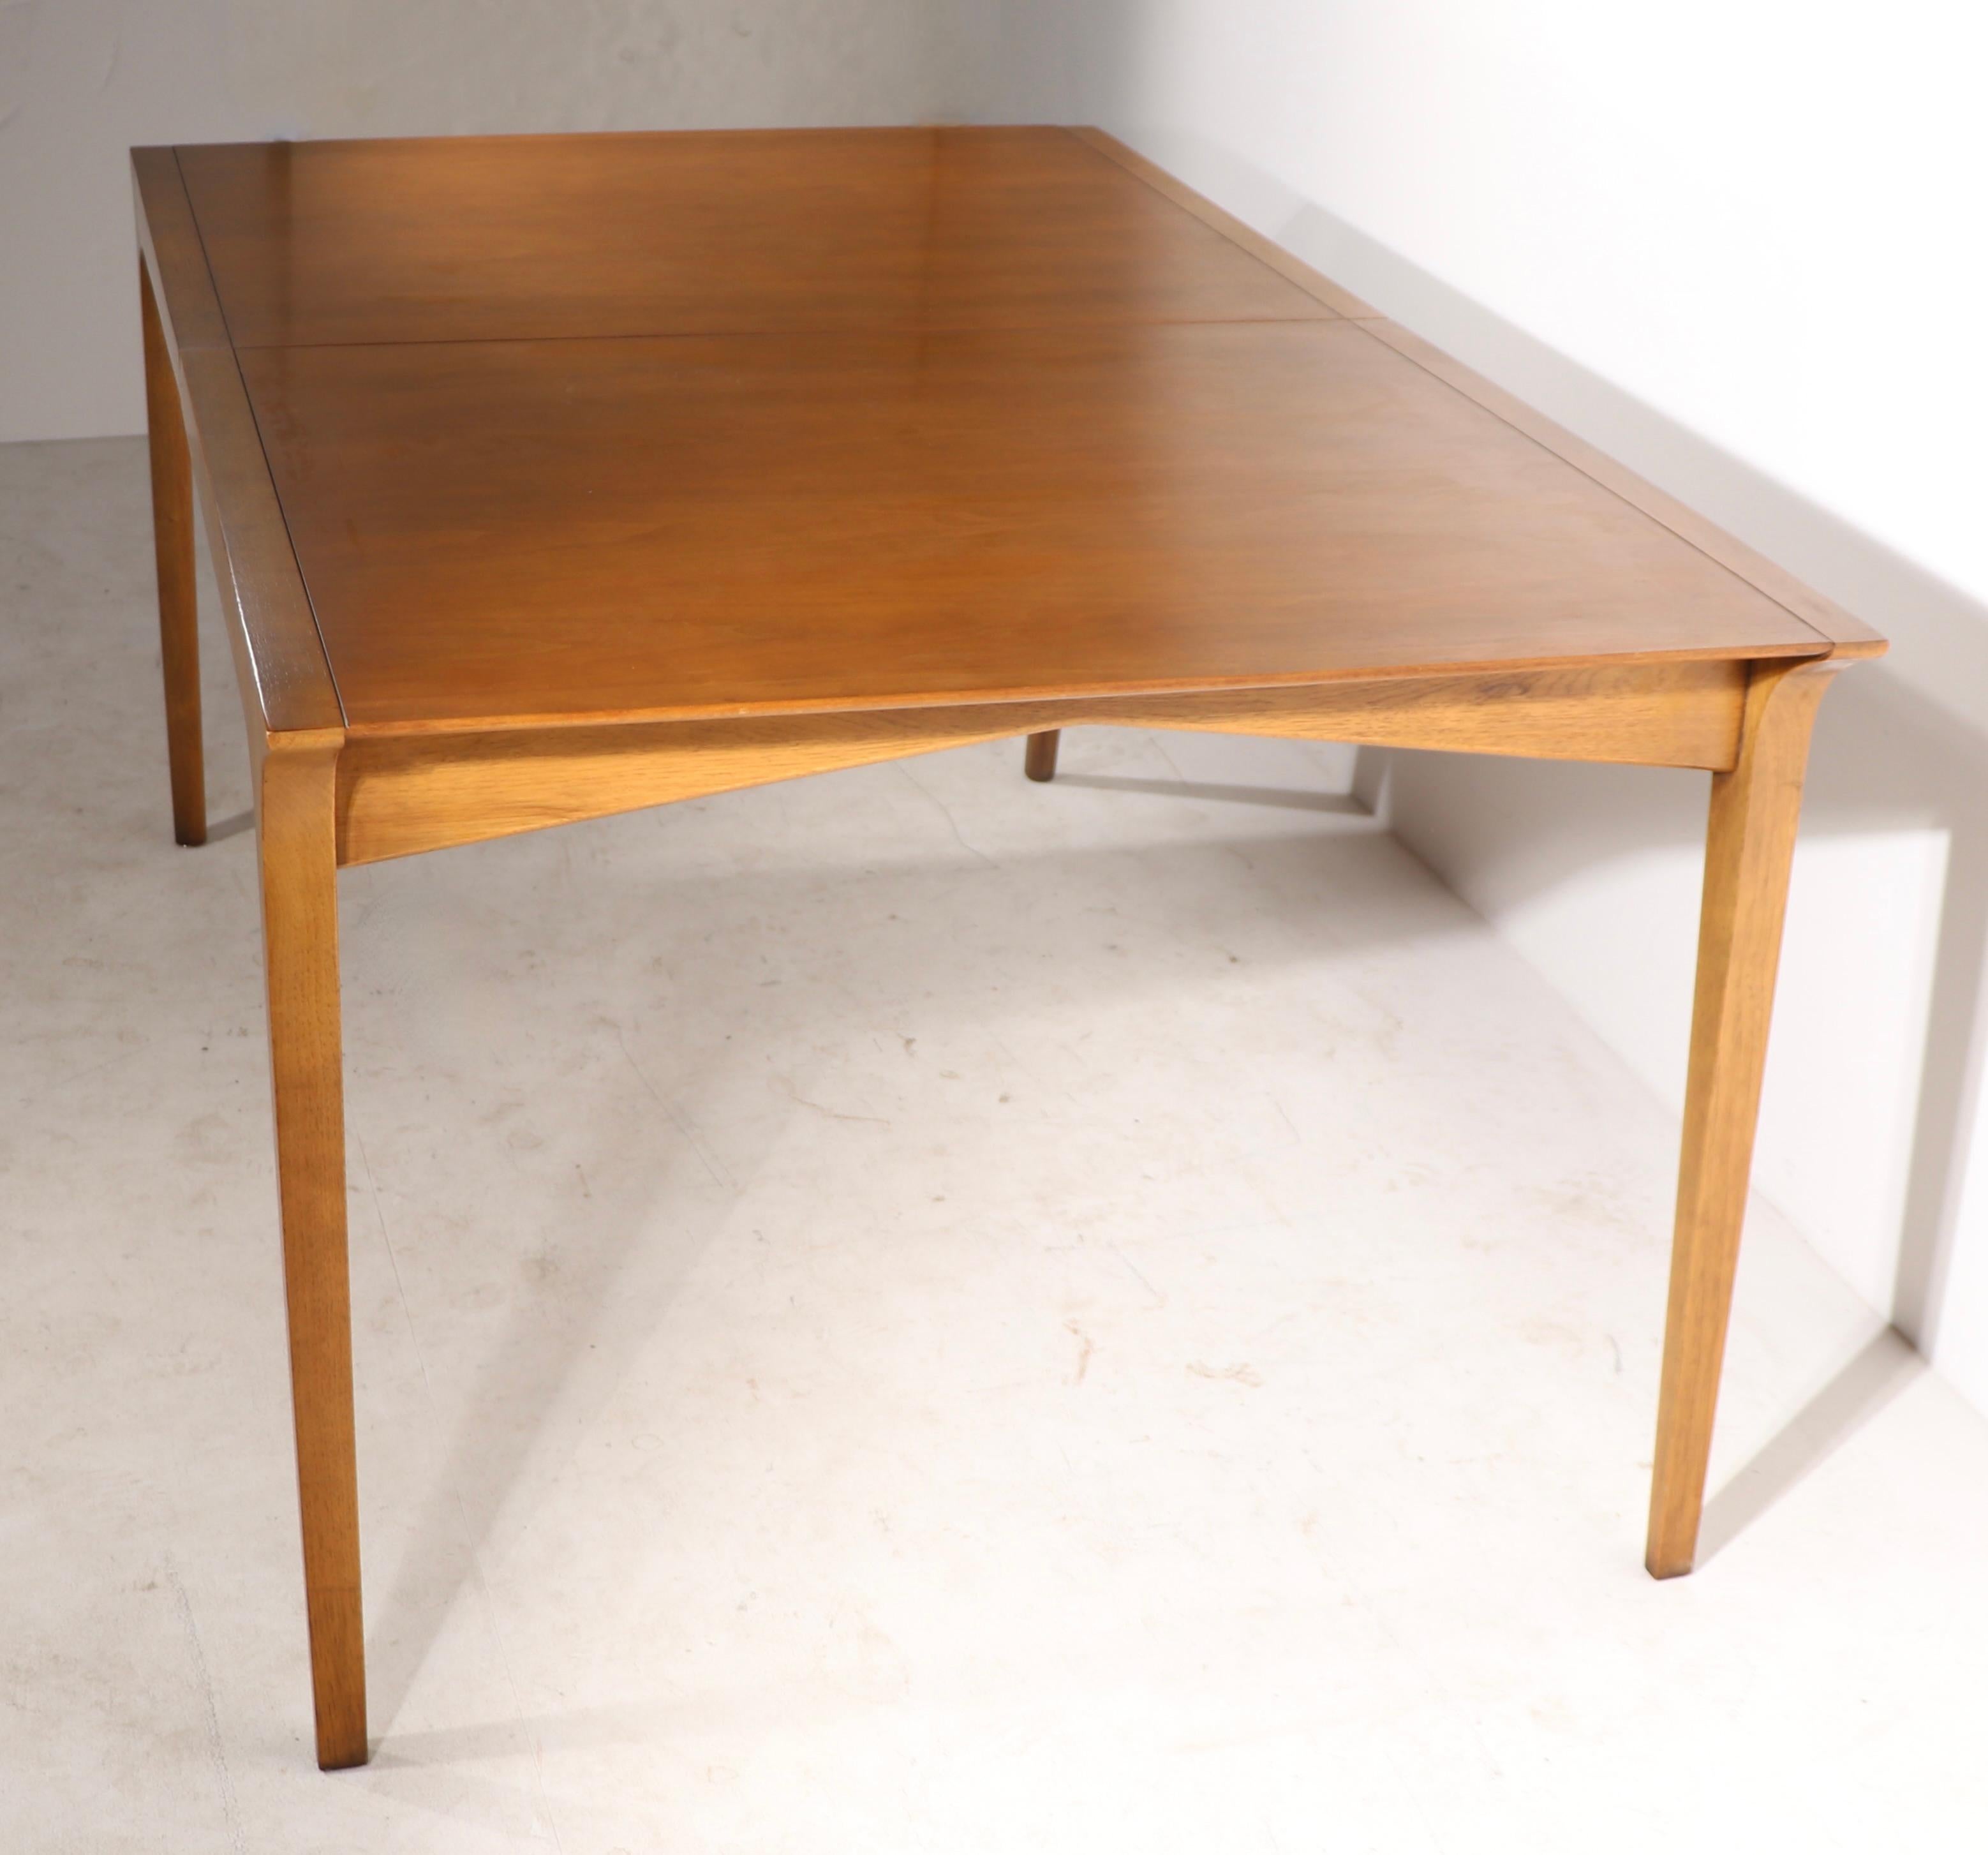 Sculptural and sophisticated architectural dining table, designed by John Van Koert for Drexel as part of the classic Profile series. This example is in very fine, original, clean condition. The table comes complete with three 12 in. leaves,